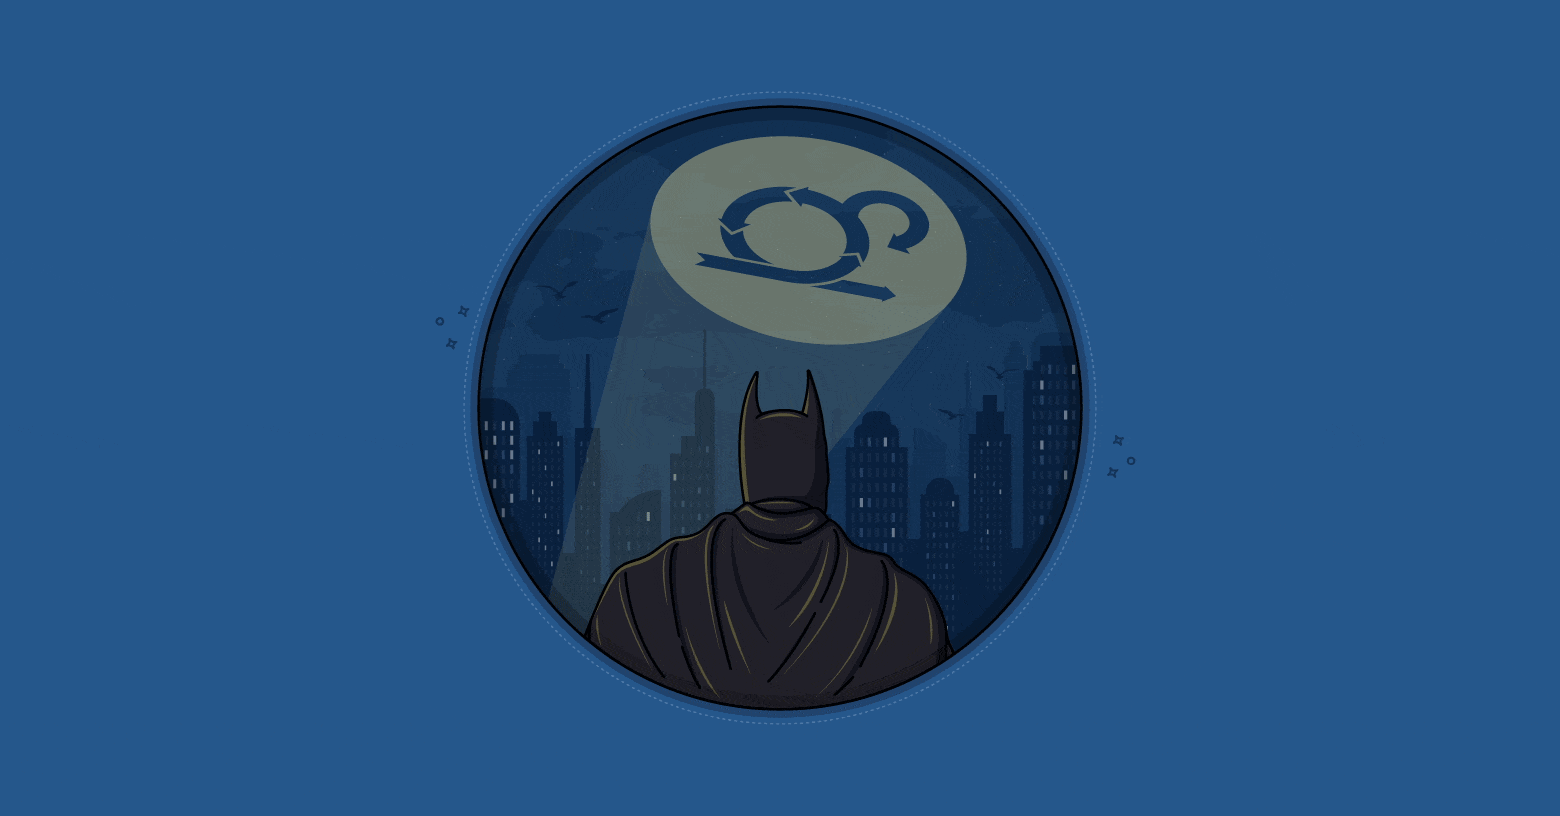 Batman for Scrum Master? 5 Ways He'd Be Great at the Job 5 Traits Great  Scrum Masters Share with Batman